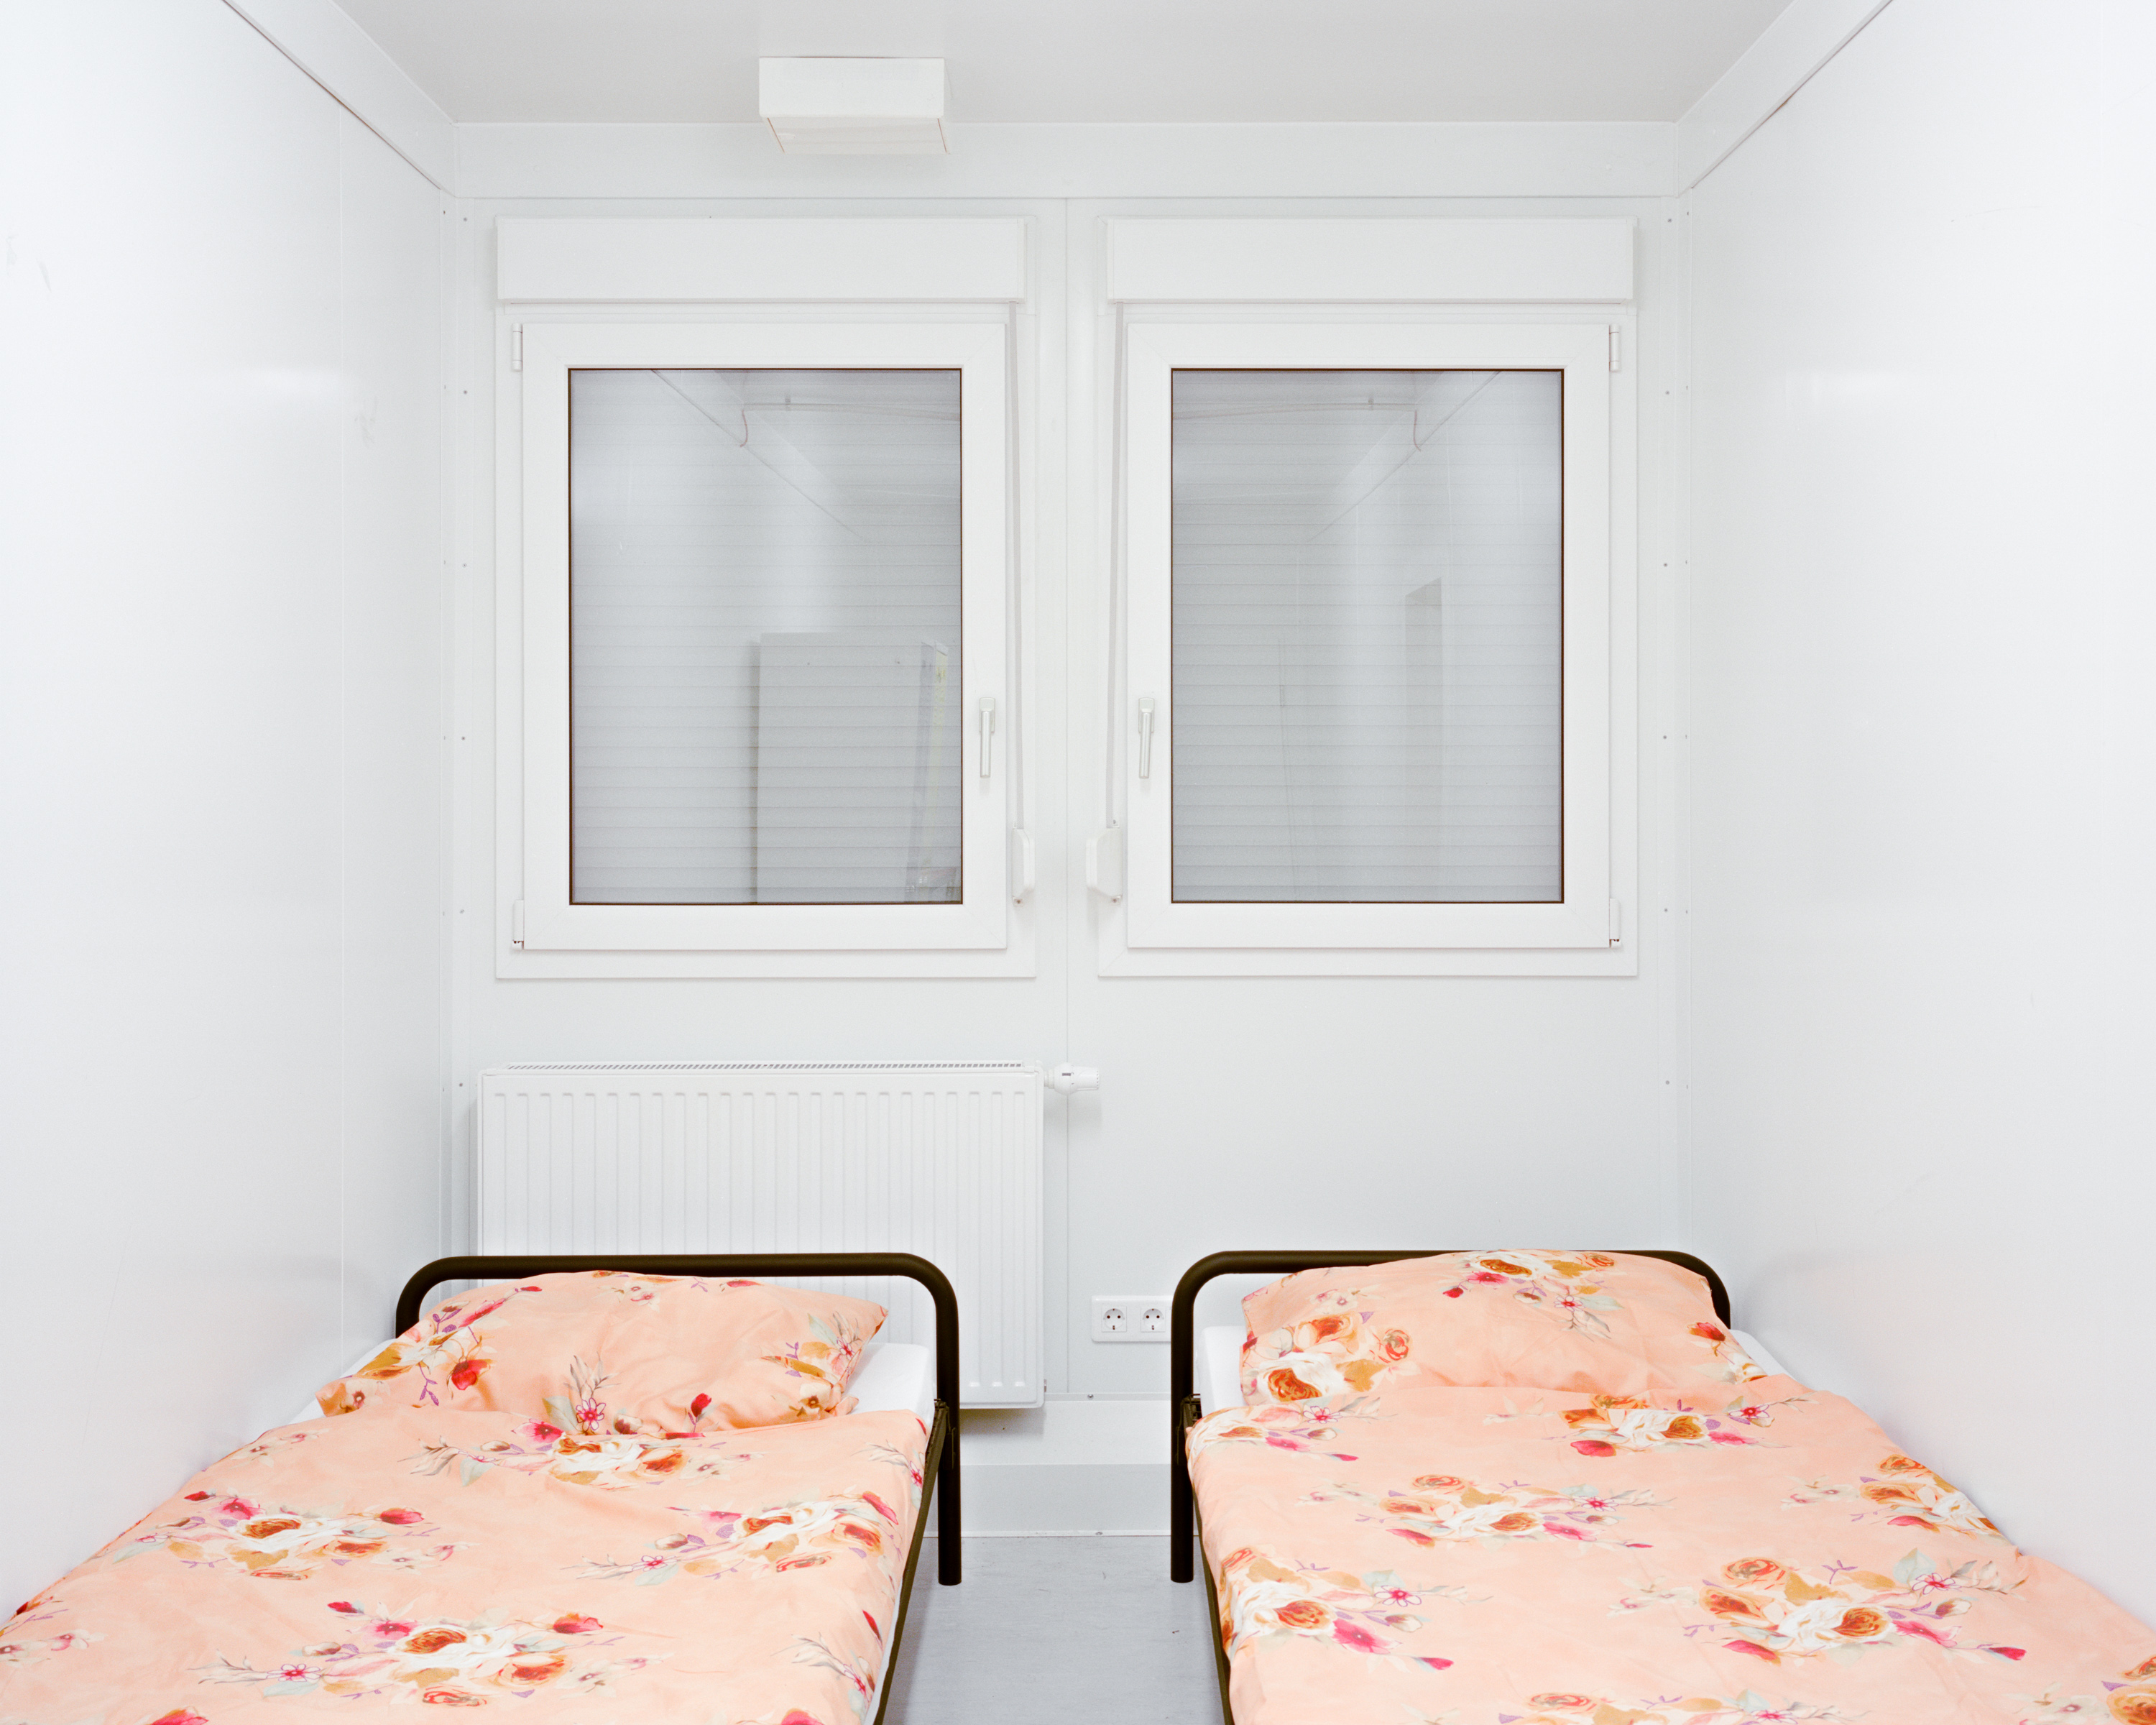 You see two unused single beds in a very small rooms. There is less then a meter space between the beds, the windows are closed. The room is very clean.